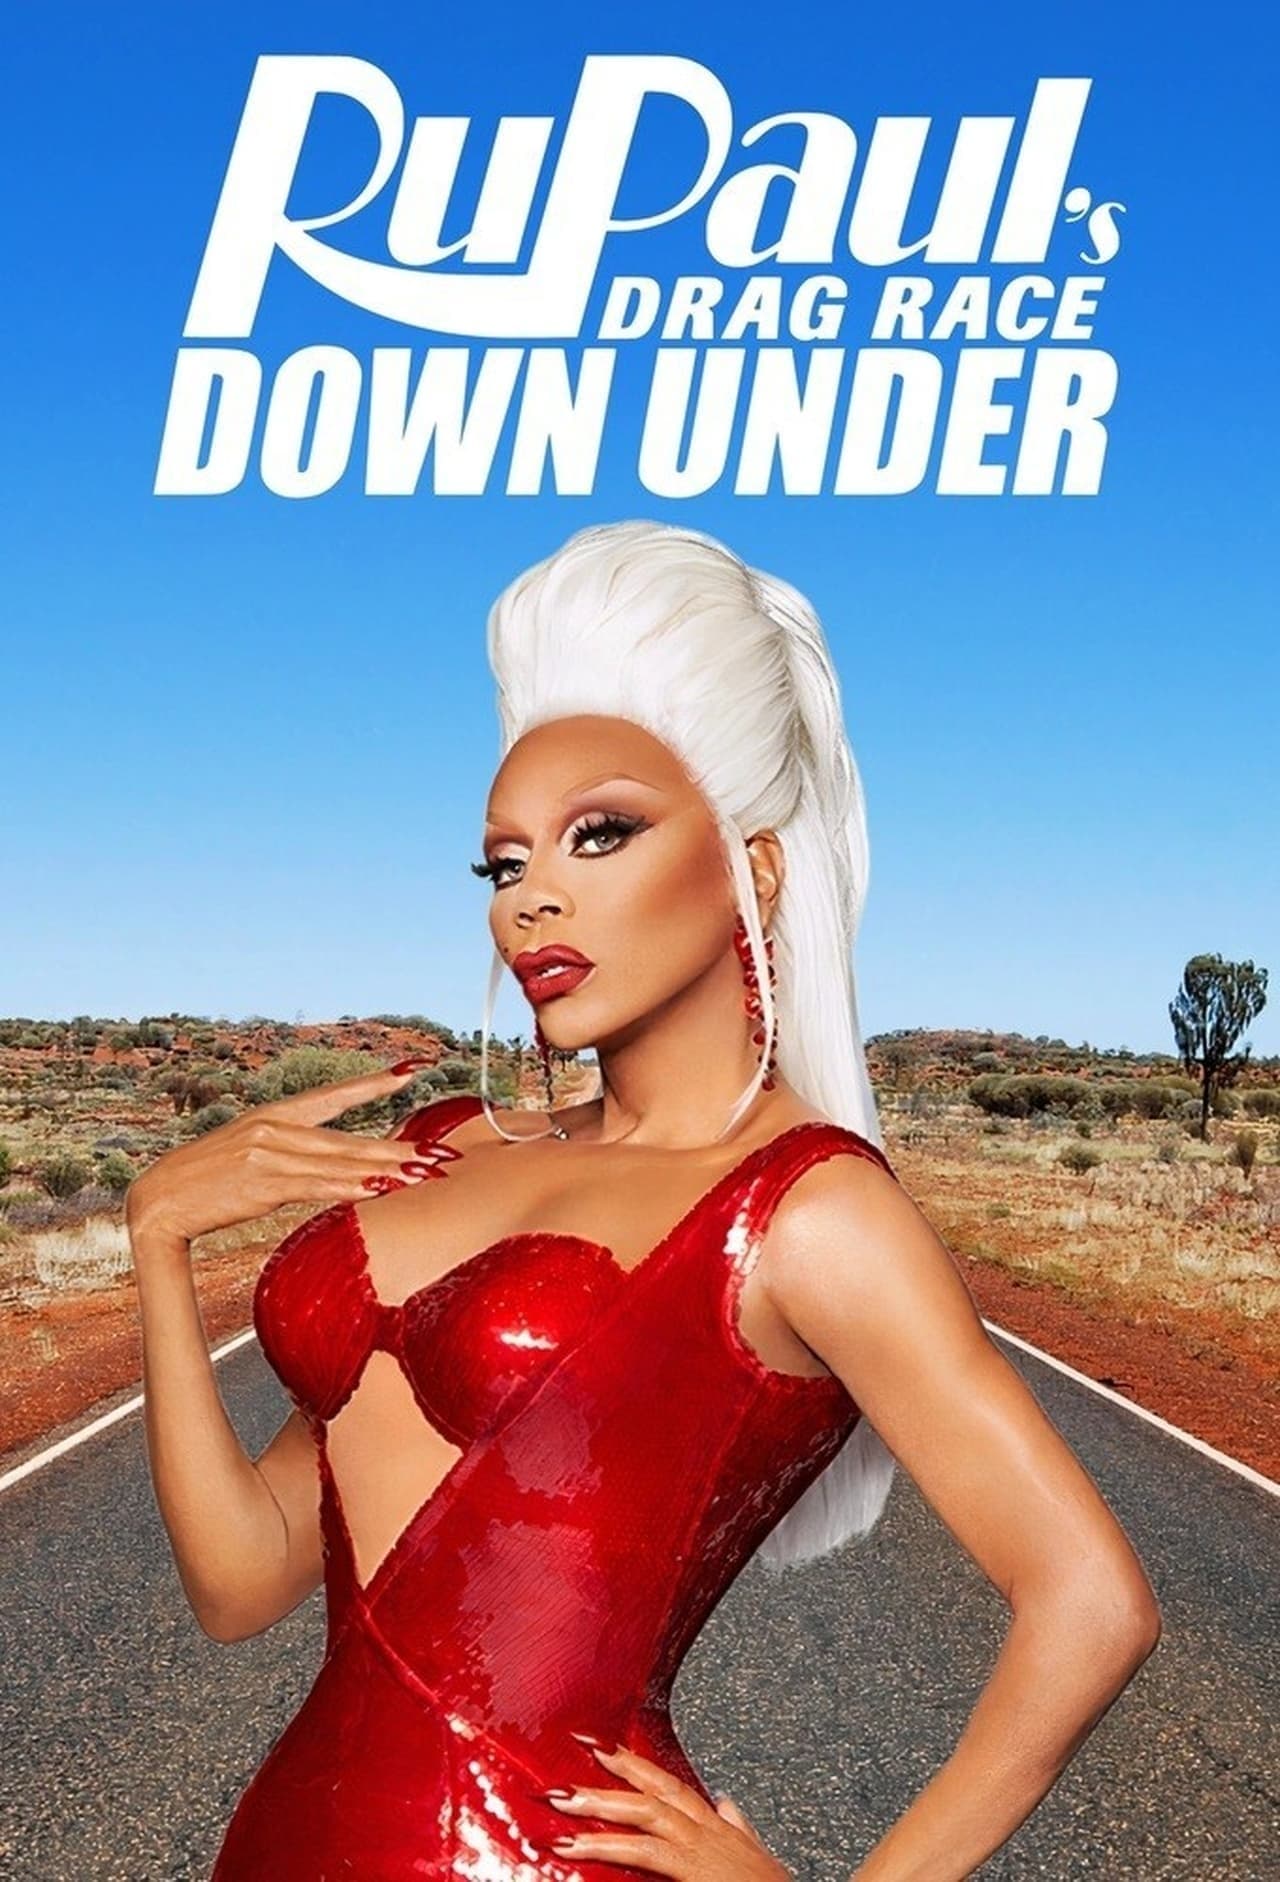 RuPaul's Drag Race Down Under TV Shows About Gay Culture